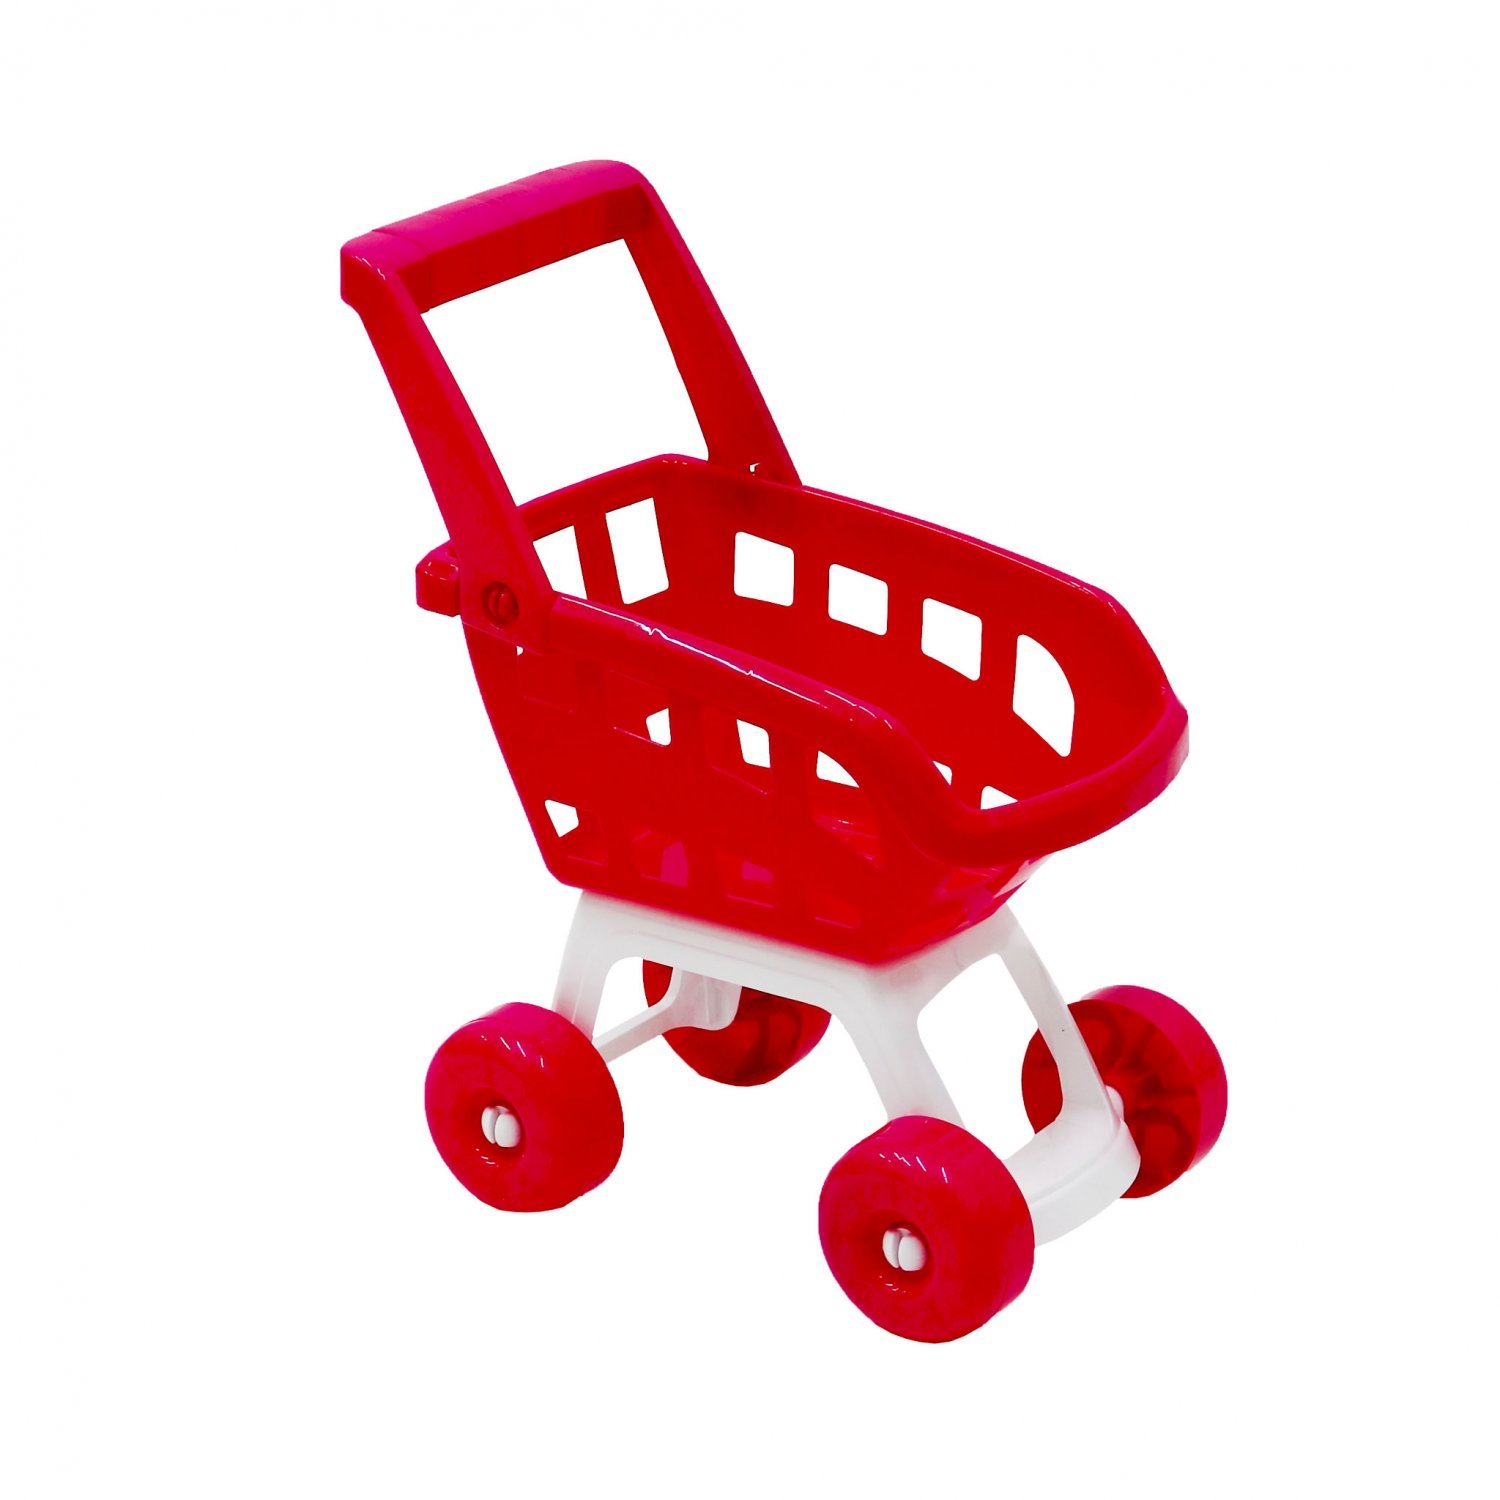 Details about   Kids Shopping Play Role Toy Cart Set Plastic Childrens Blue Trolley UK 